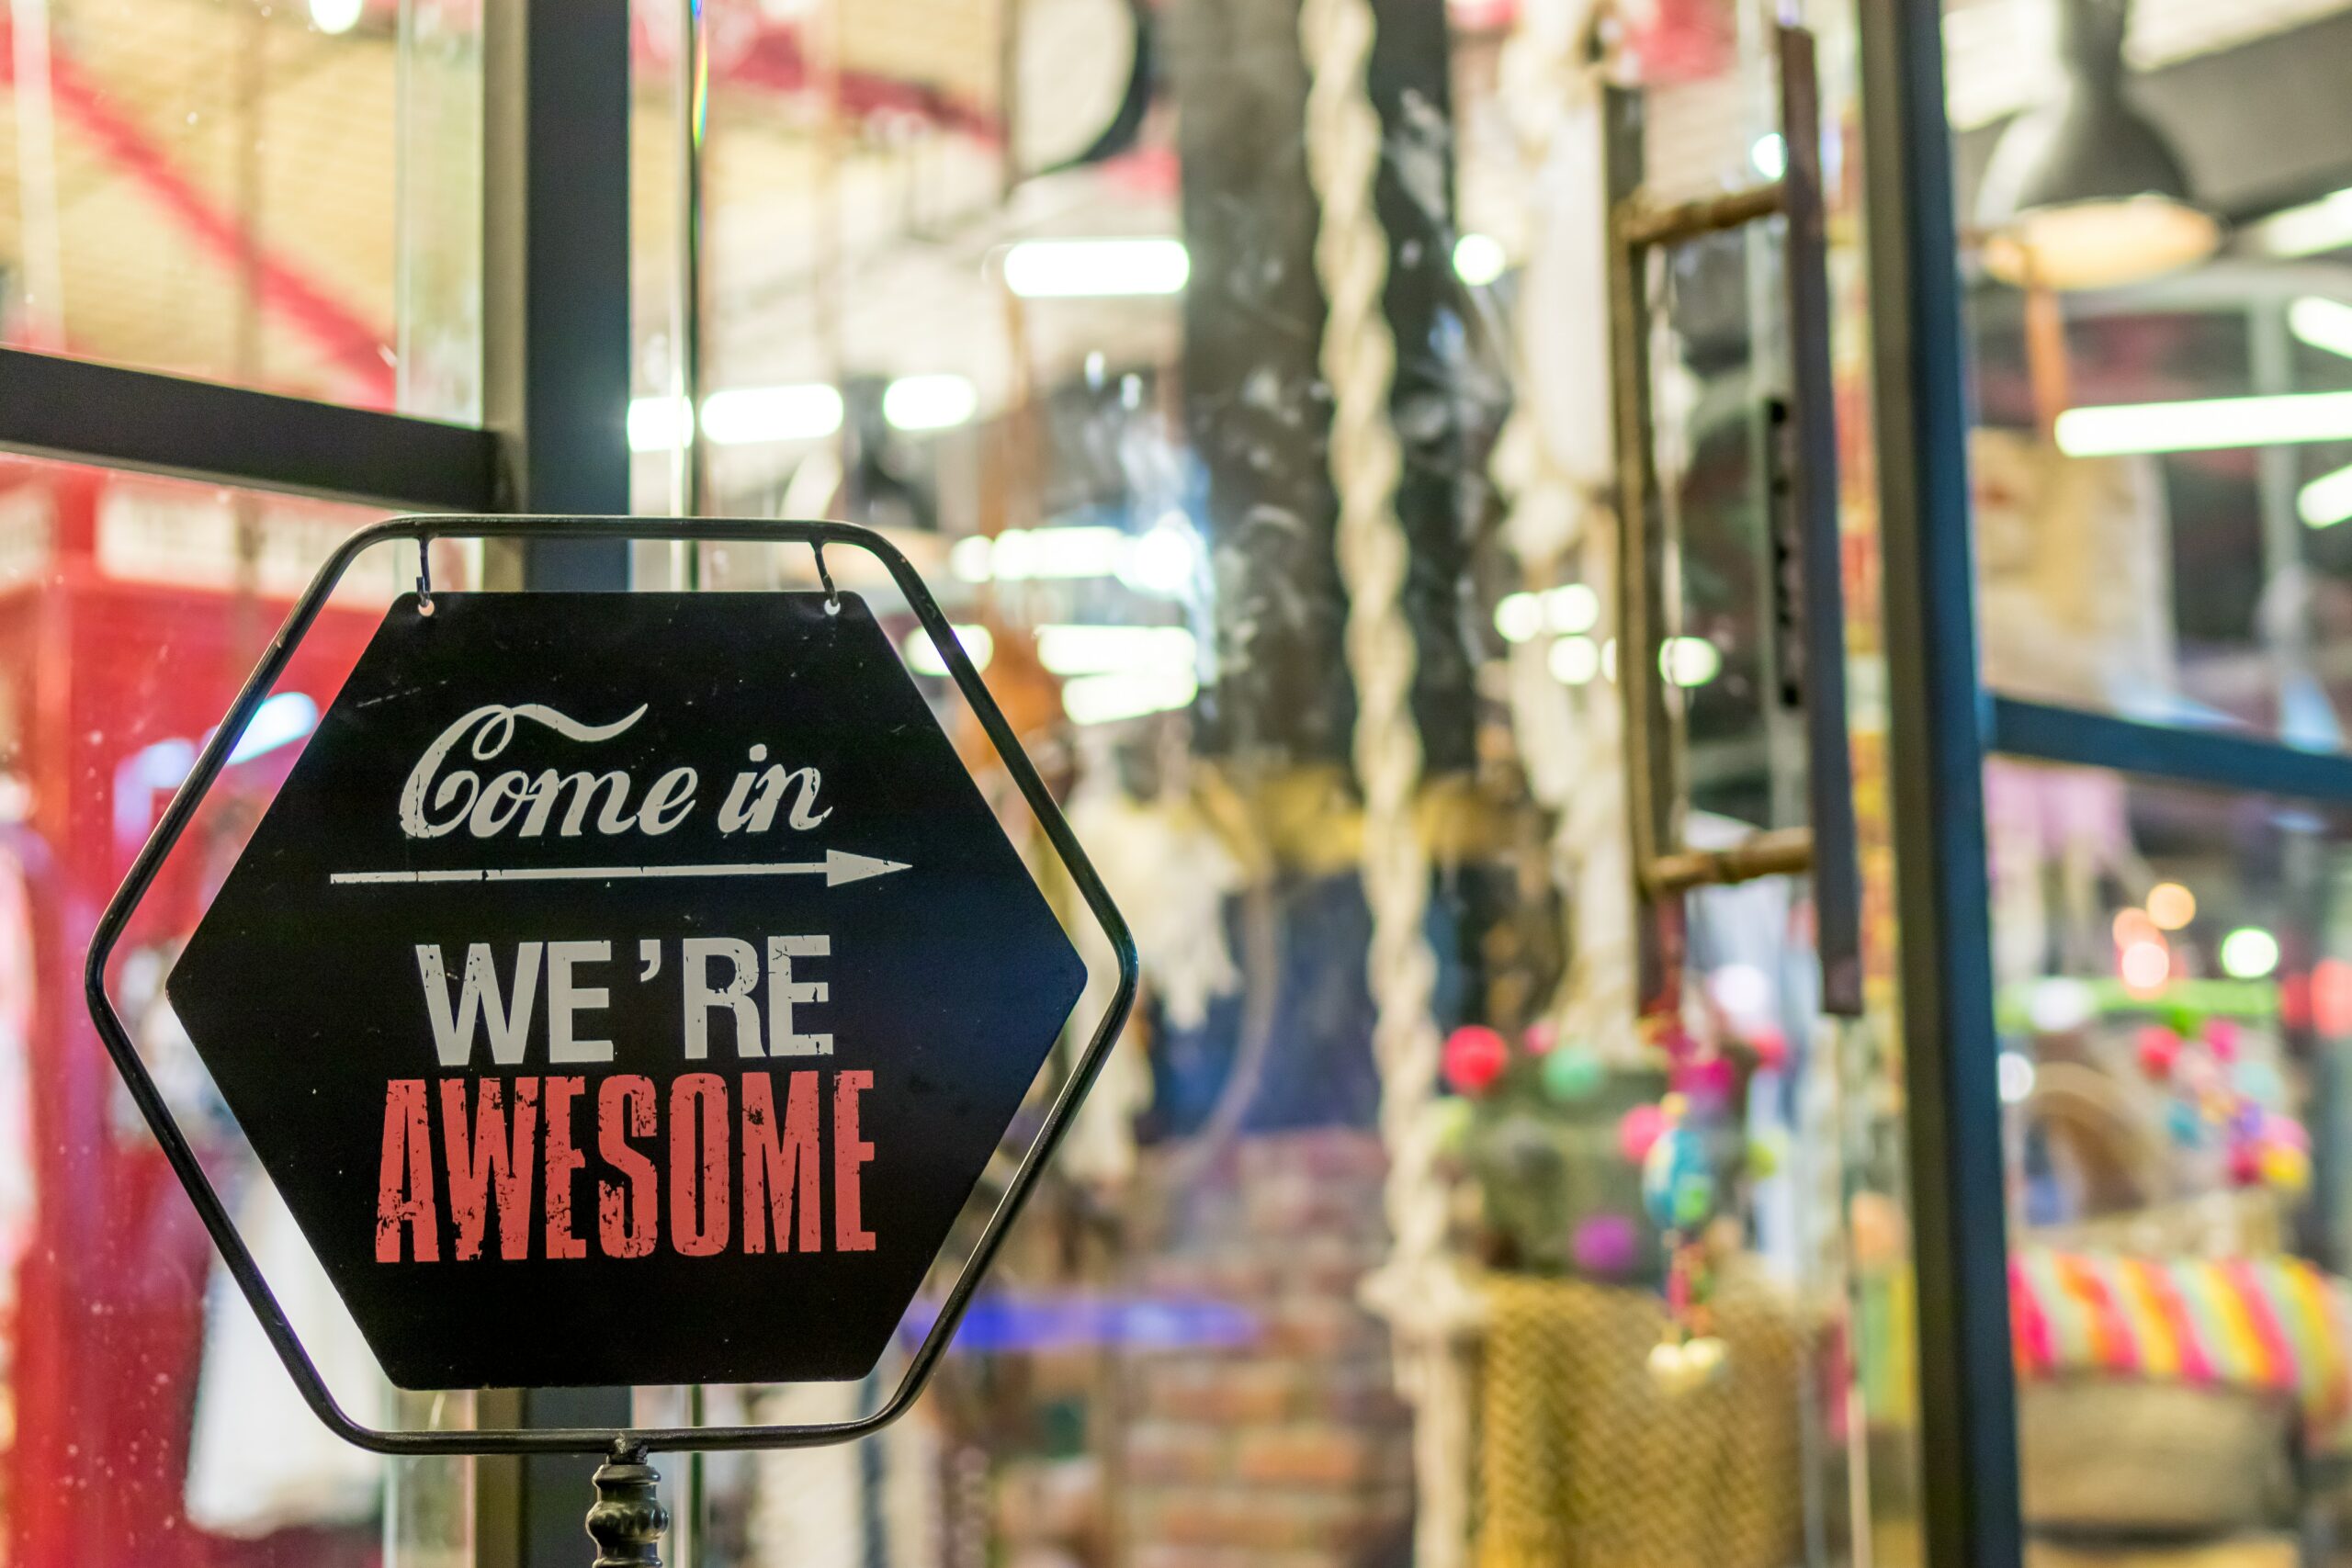 Store sign says "Come In, We're Awesome"